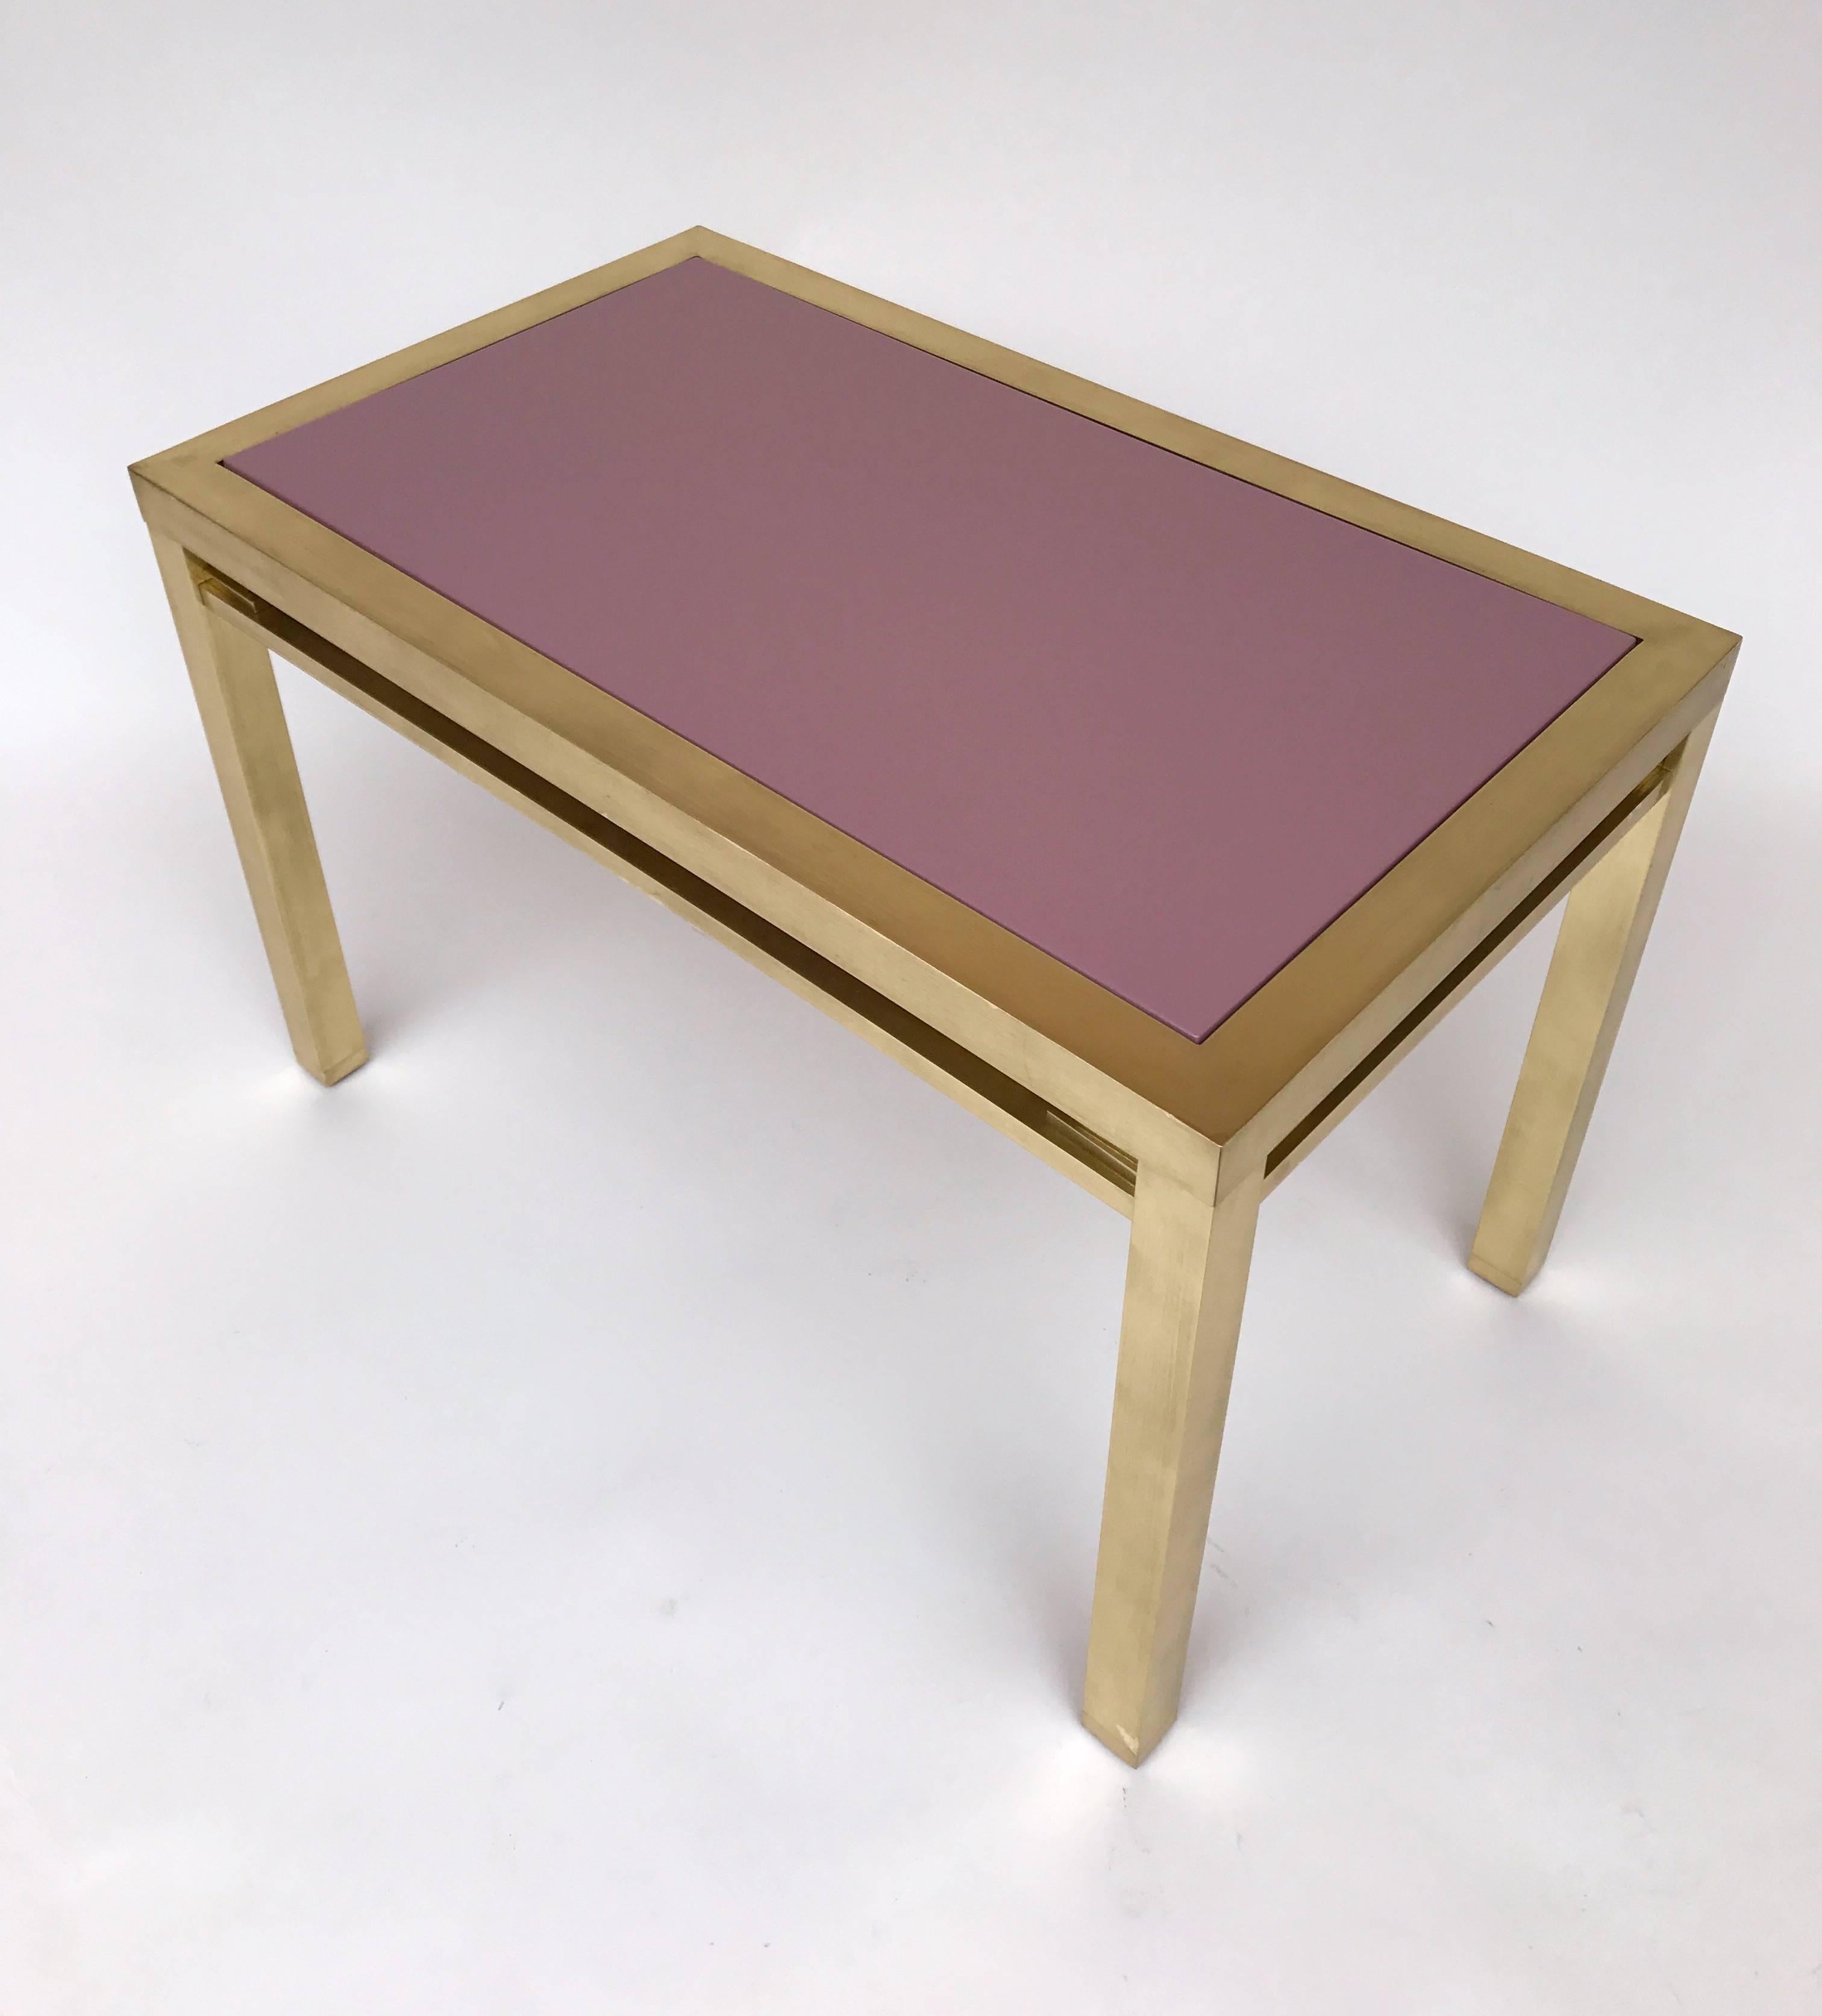 Pair of side end low tables or nightstands by Guy Lefèvre for Maison Jansen. Full brass, delicious light purple parma lacquered top. Famous manufacture like Maison Baguès, Guy Lefevre, Romeo Rega, Willy Rizzo, Mario Sabot, Hollywood Regency.